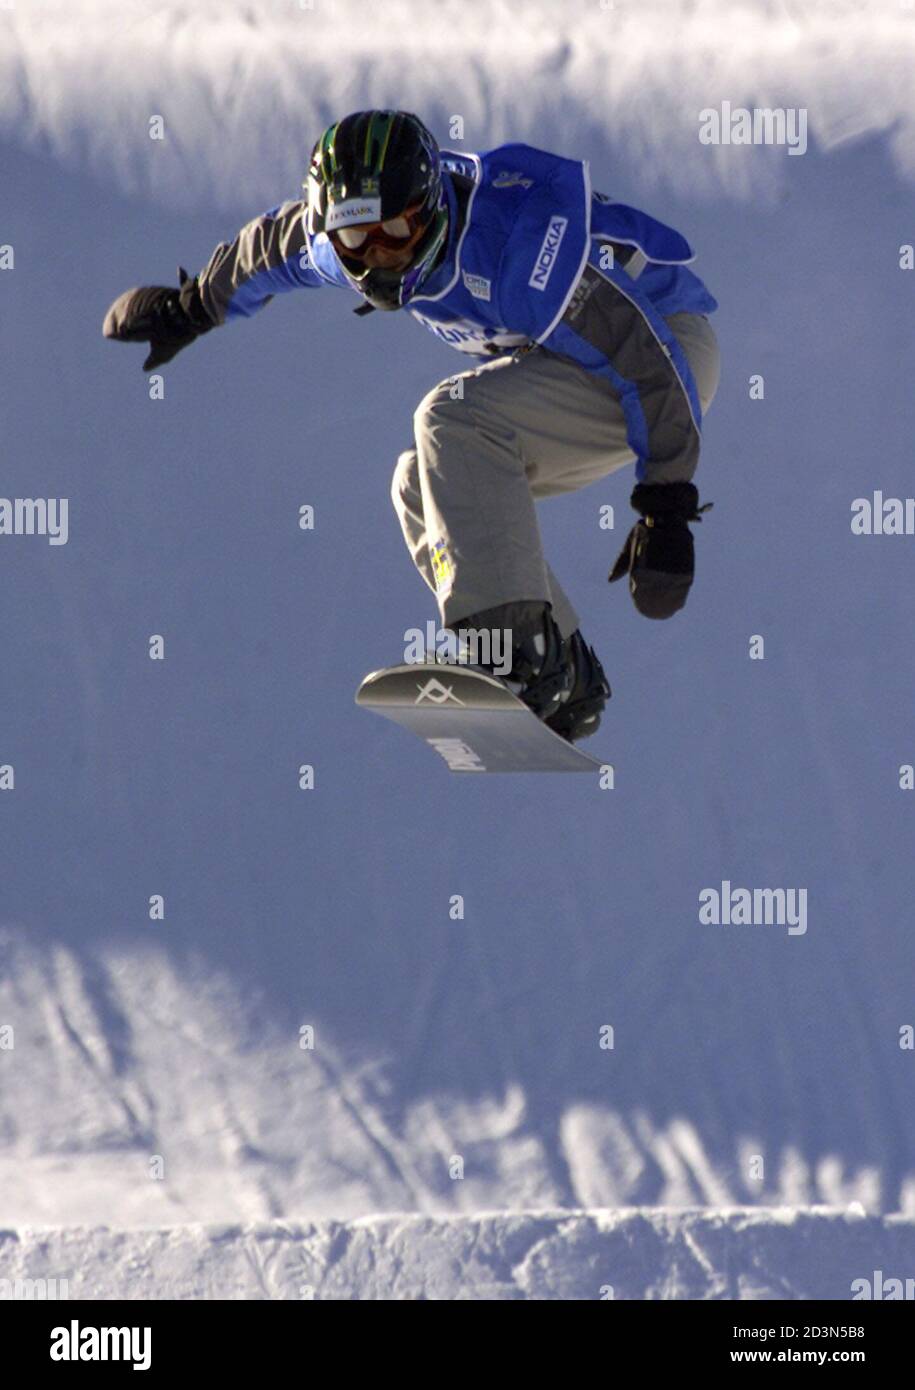 Paul-Henri Delerue of France takes a jump during the Snowboard Cross  qualifying at the Snowboard World Cup in Tignes November 17, 2001.  REUTERS/Alexandra Winkler AX Stock Photo - Alamy